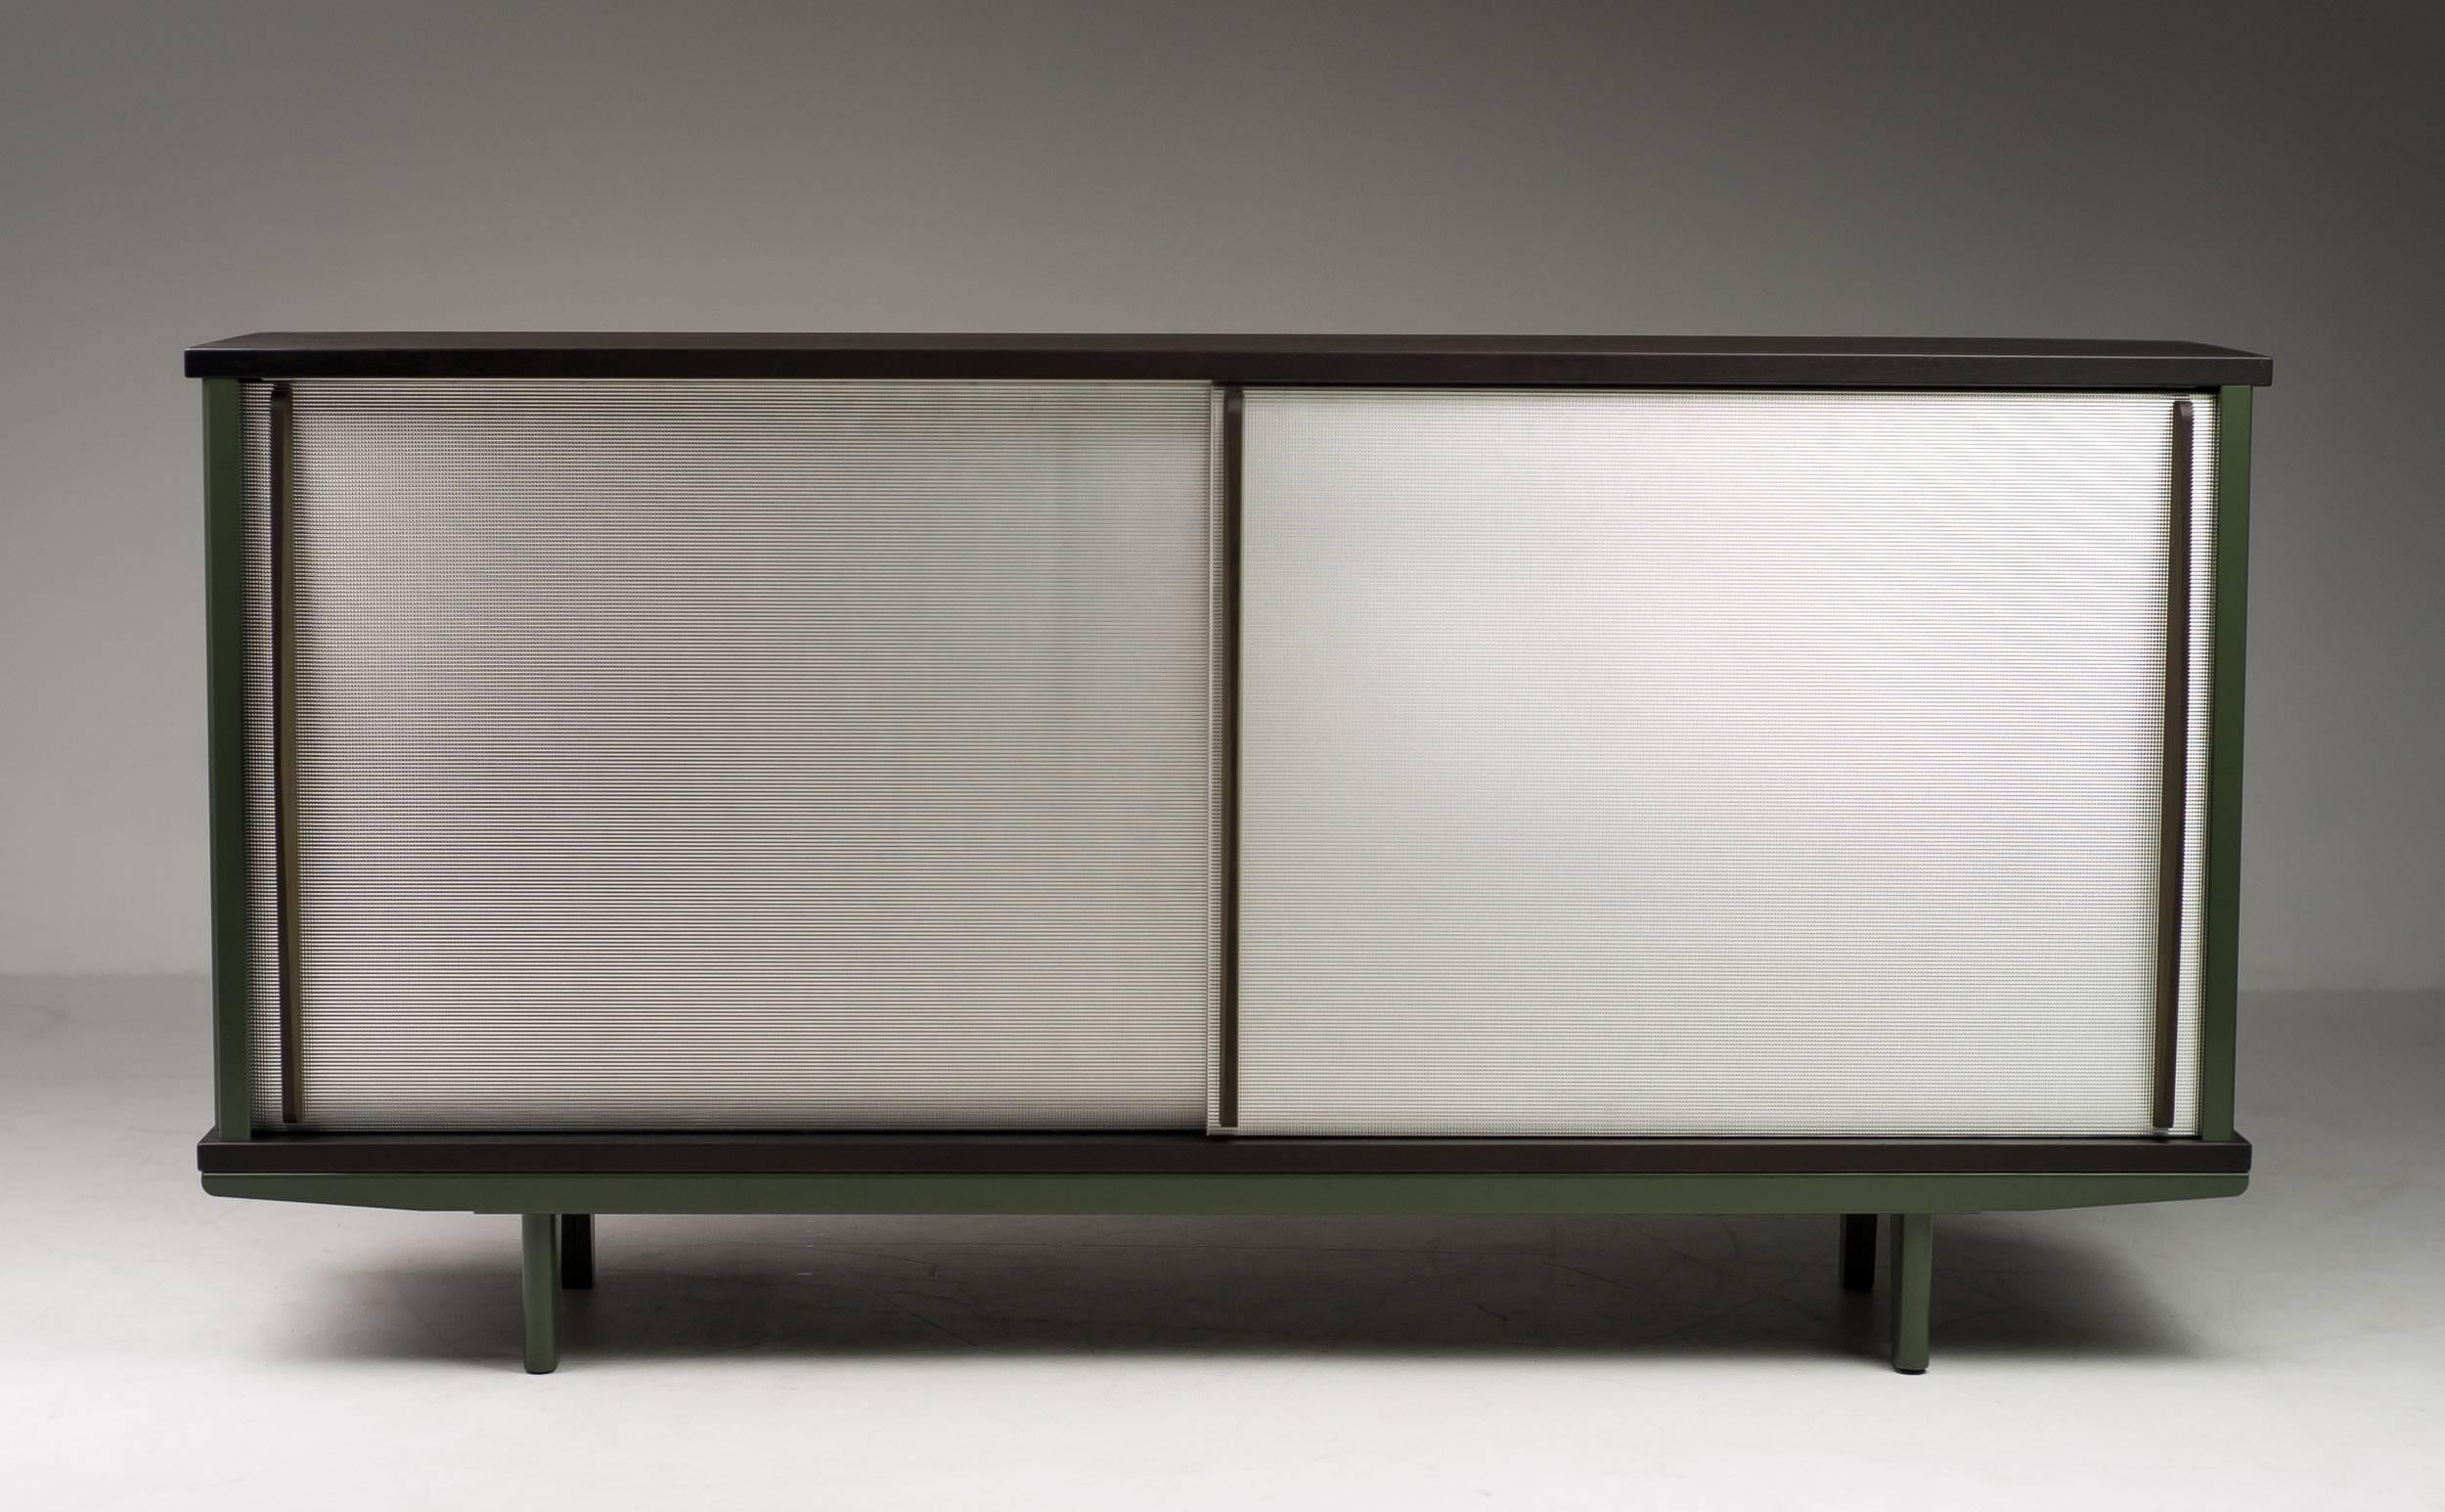 Limited edition Bahut sideboard from the G-Star Raw edition made by Vitra.
G-Star ordered these sideboards for their new Headquarters in Amsterdam by the architect Rem Koolhaas. They were also available for a limited time for other Prouvé